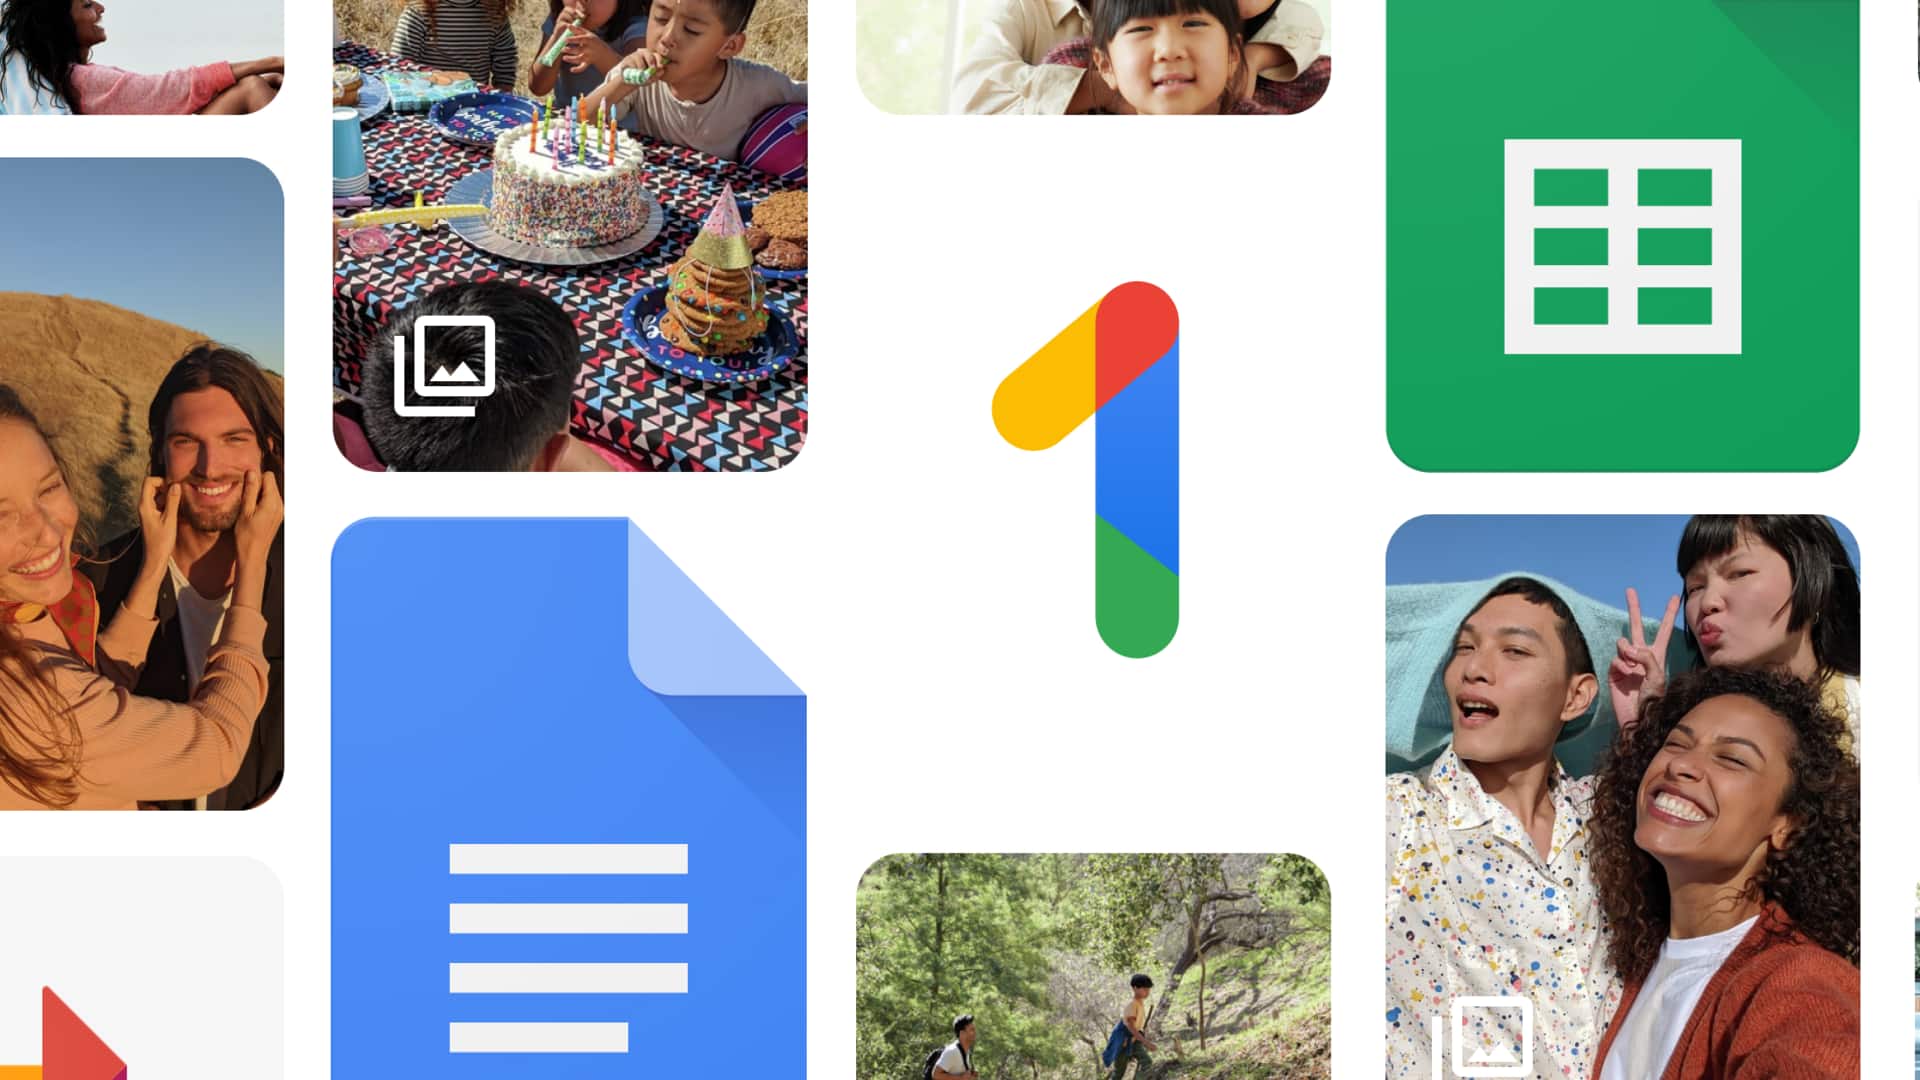 Get Google One's 3-month plan for Rs. 100: Here's how